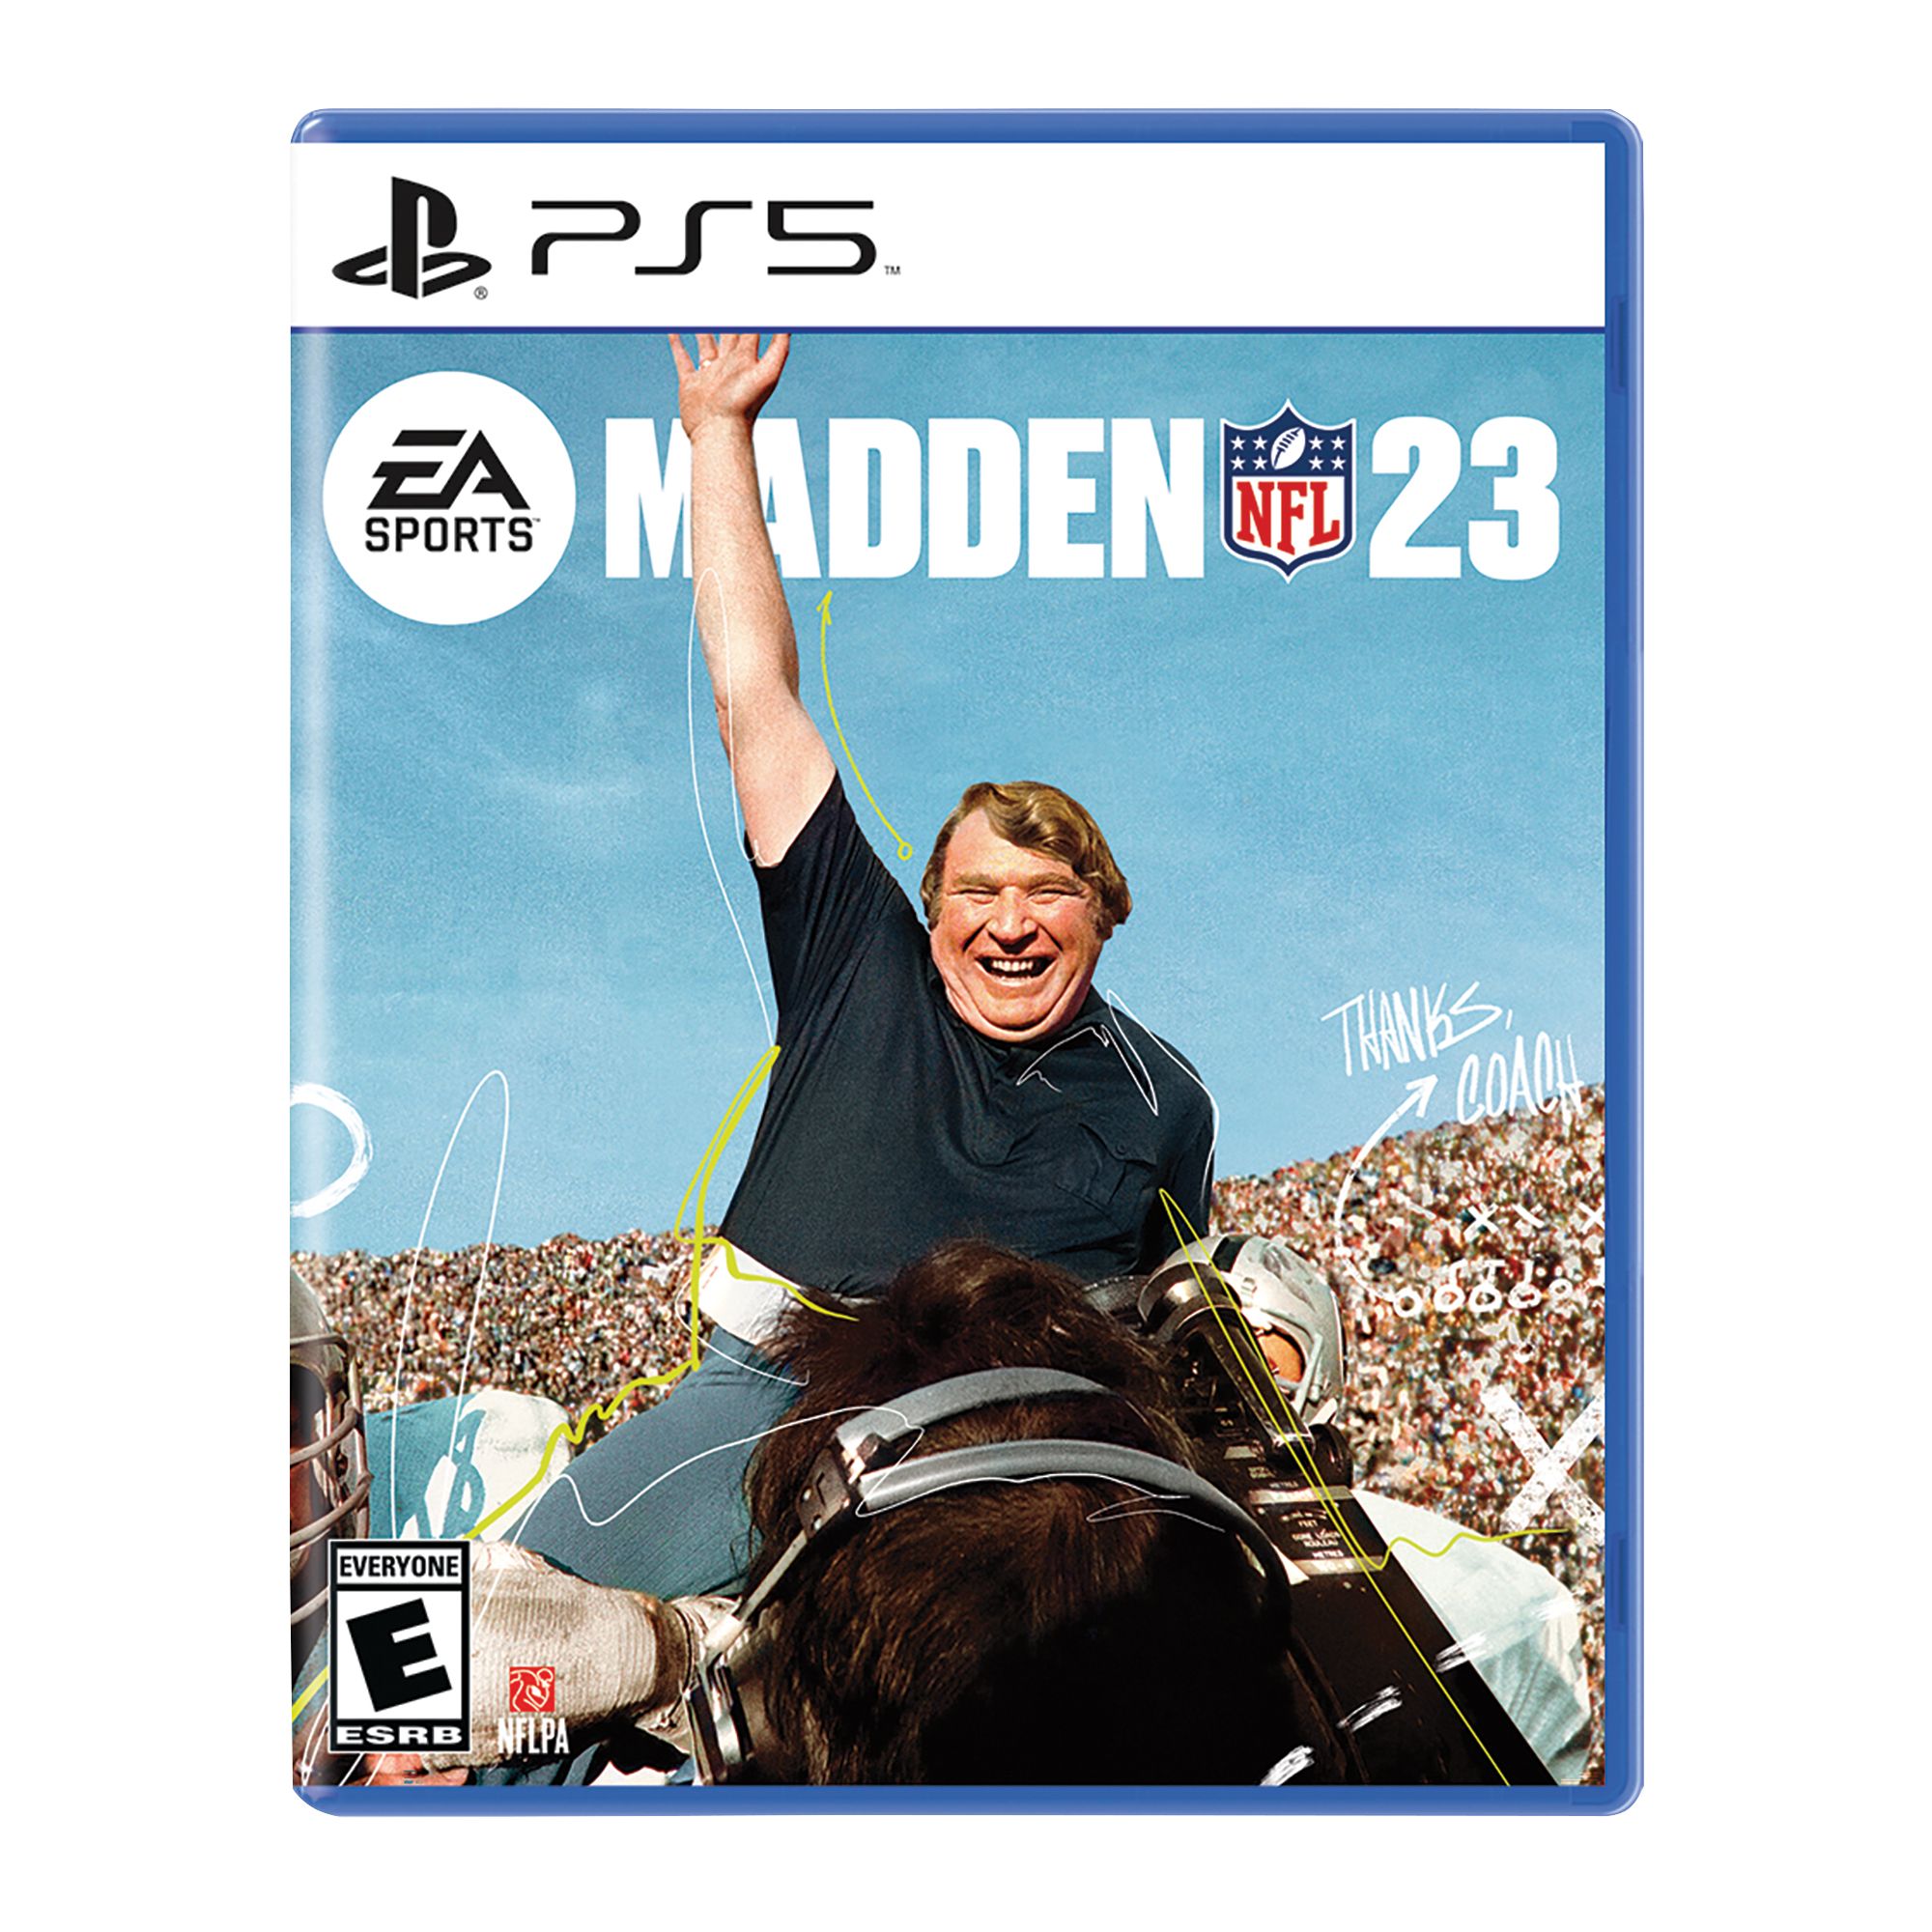 Madden NFL 23 (PS5) cheap - Price of $14.78